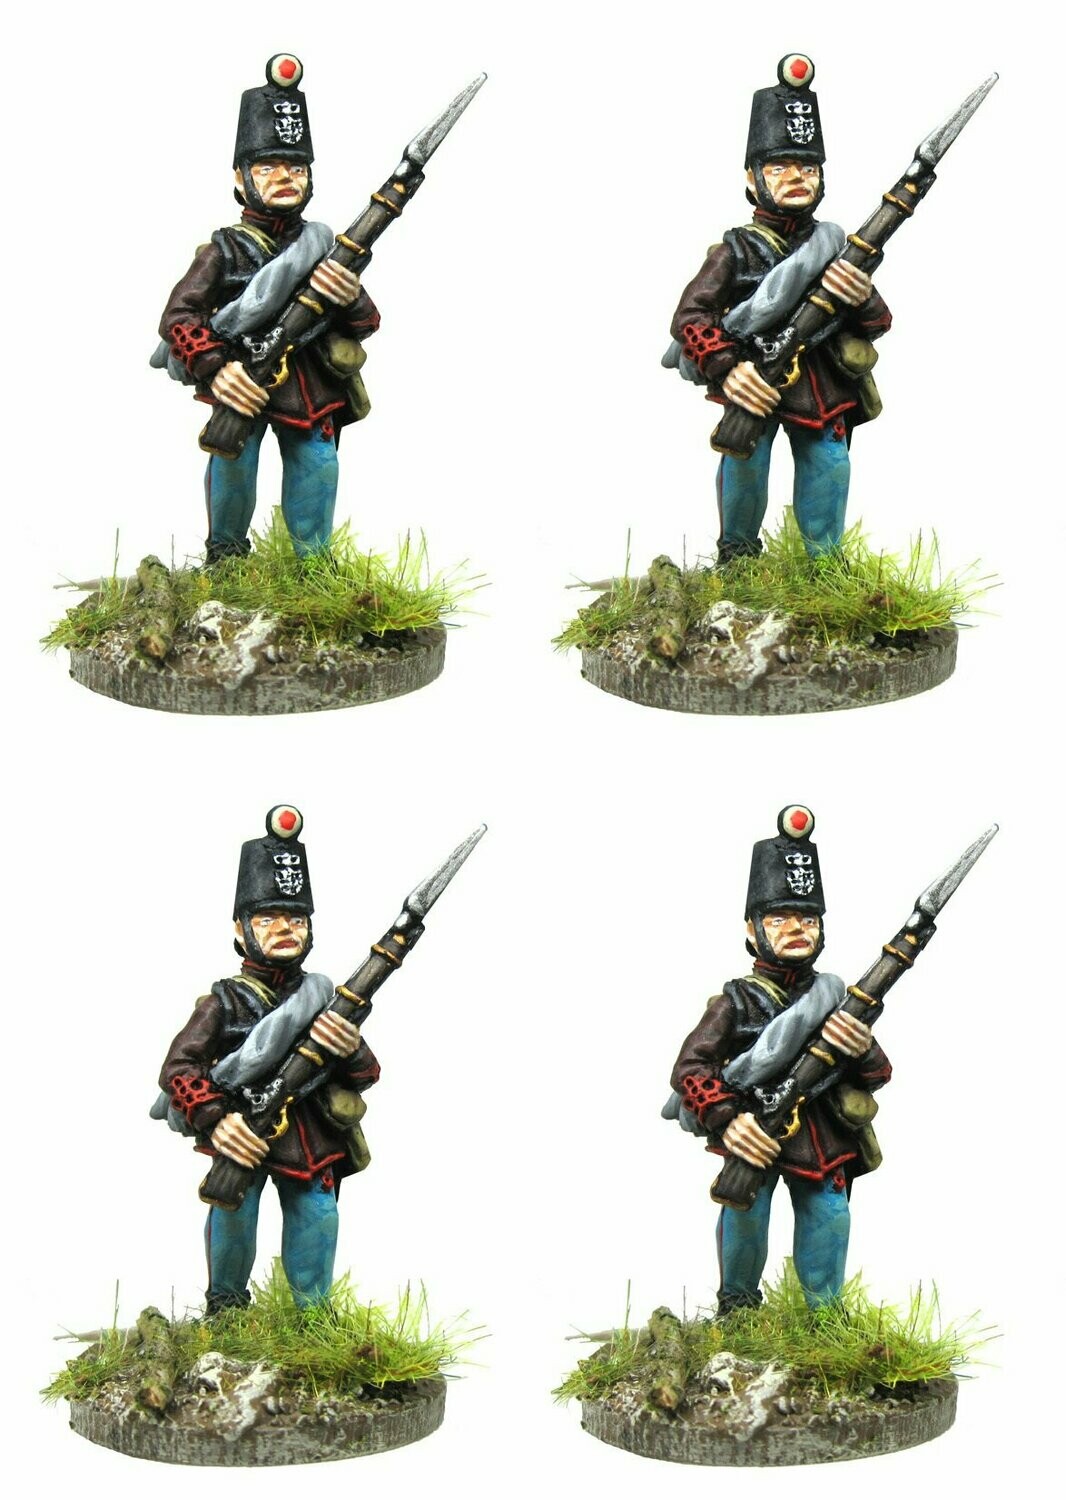 28mm Hungarian Honved advancing in marching uniform and shako 1848-1849